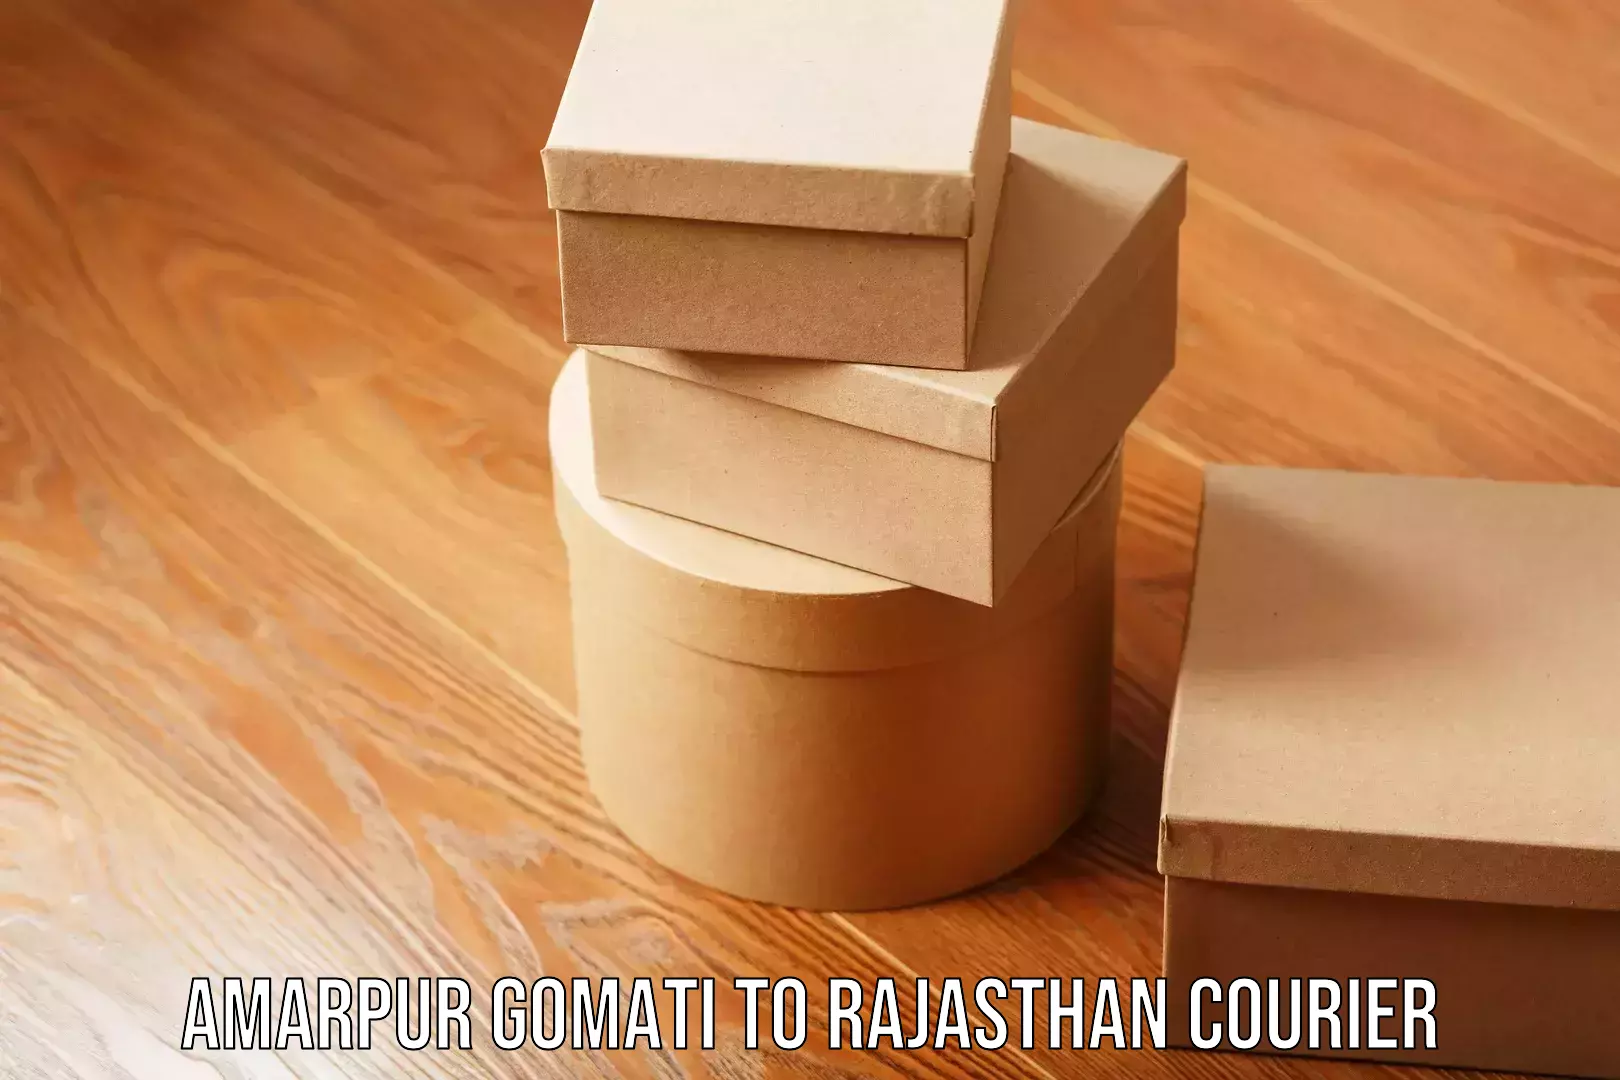 24-hour courier service Amarpur Gomati to Rajasthan